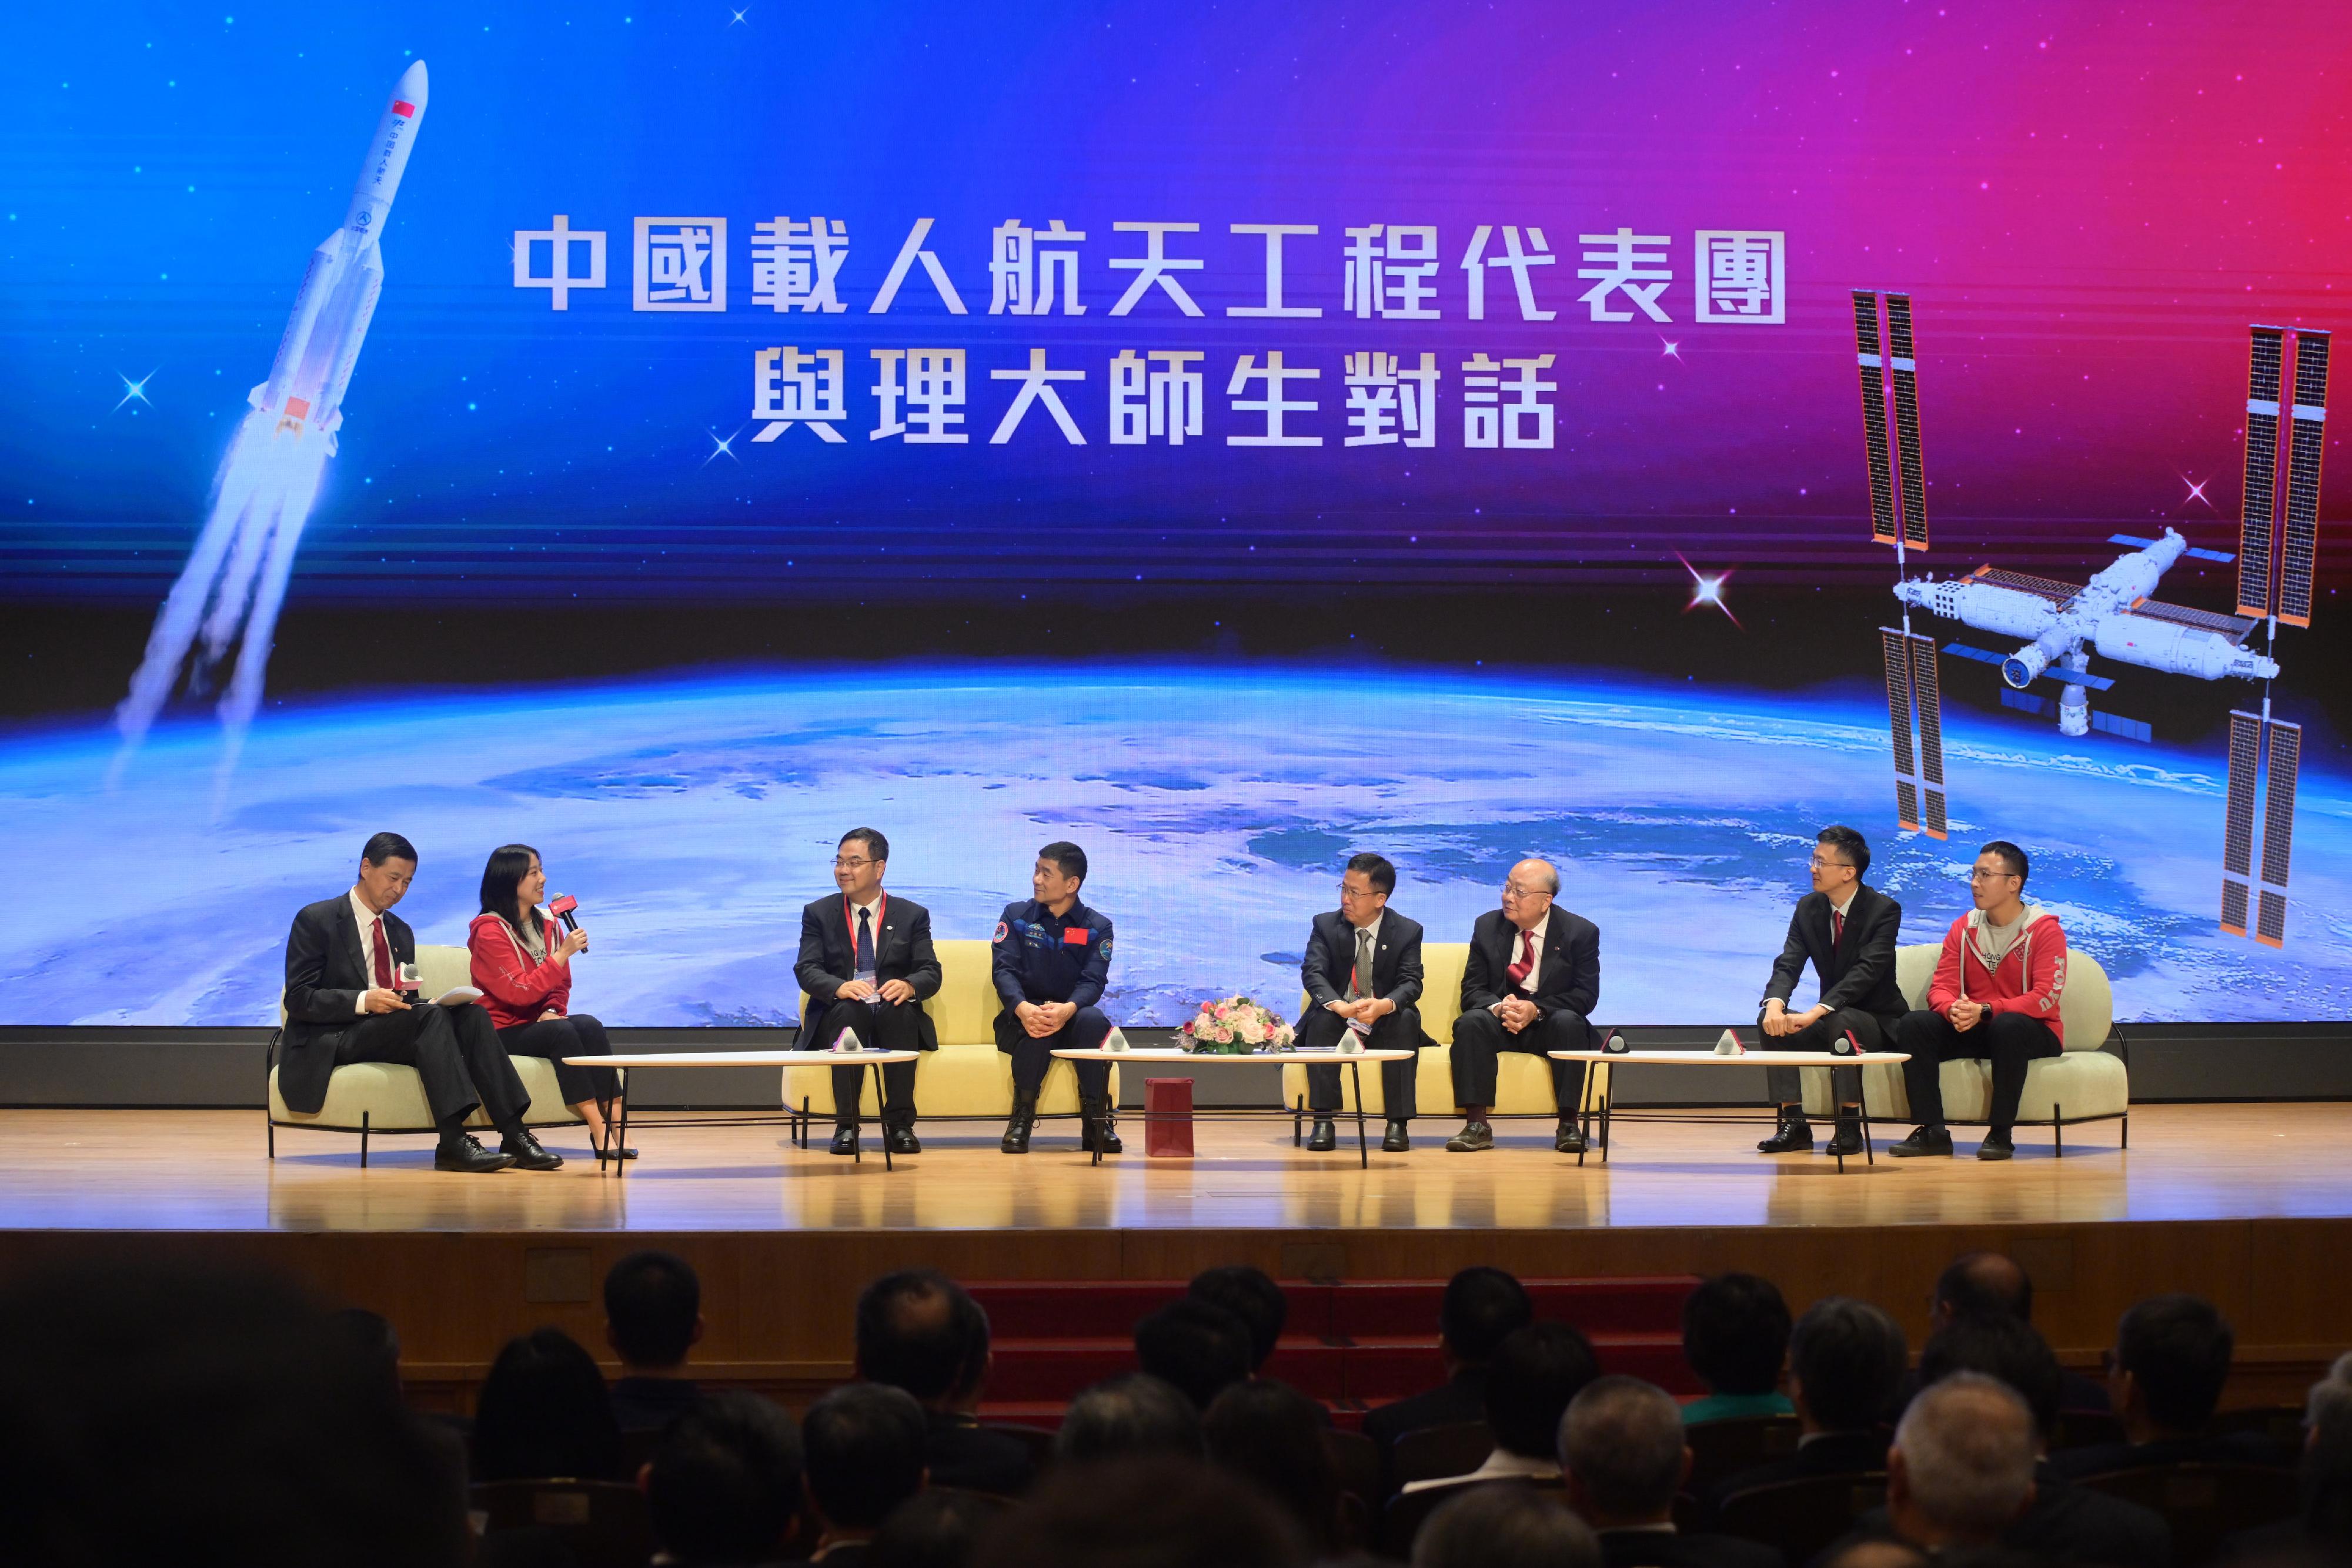 The China Manned Space delegation continued their visit to Hong Kong today (November 30). Photo shows Shenzhou-12 astronaut Mr Liu Boming (fourth left); delegation members Mr Yang Hong (third left) and Mr Dong Guangliang (fourth right) attending the dialogue session with teachers and students held at the Hong Kong Polytechnic University.